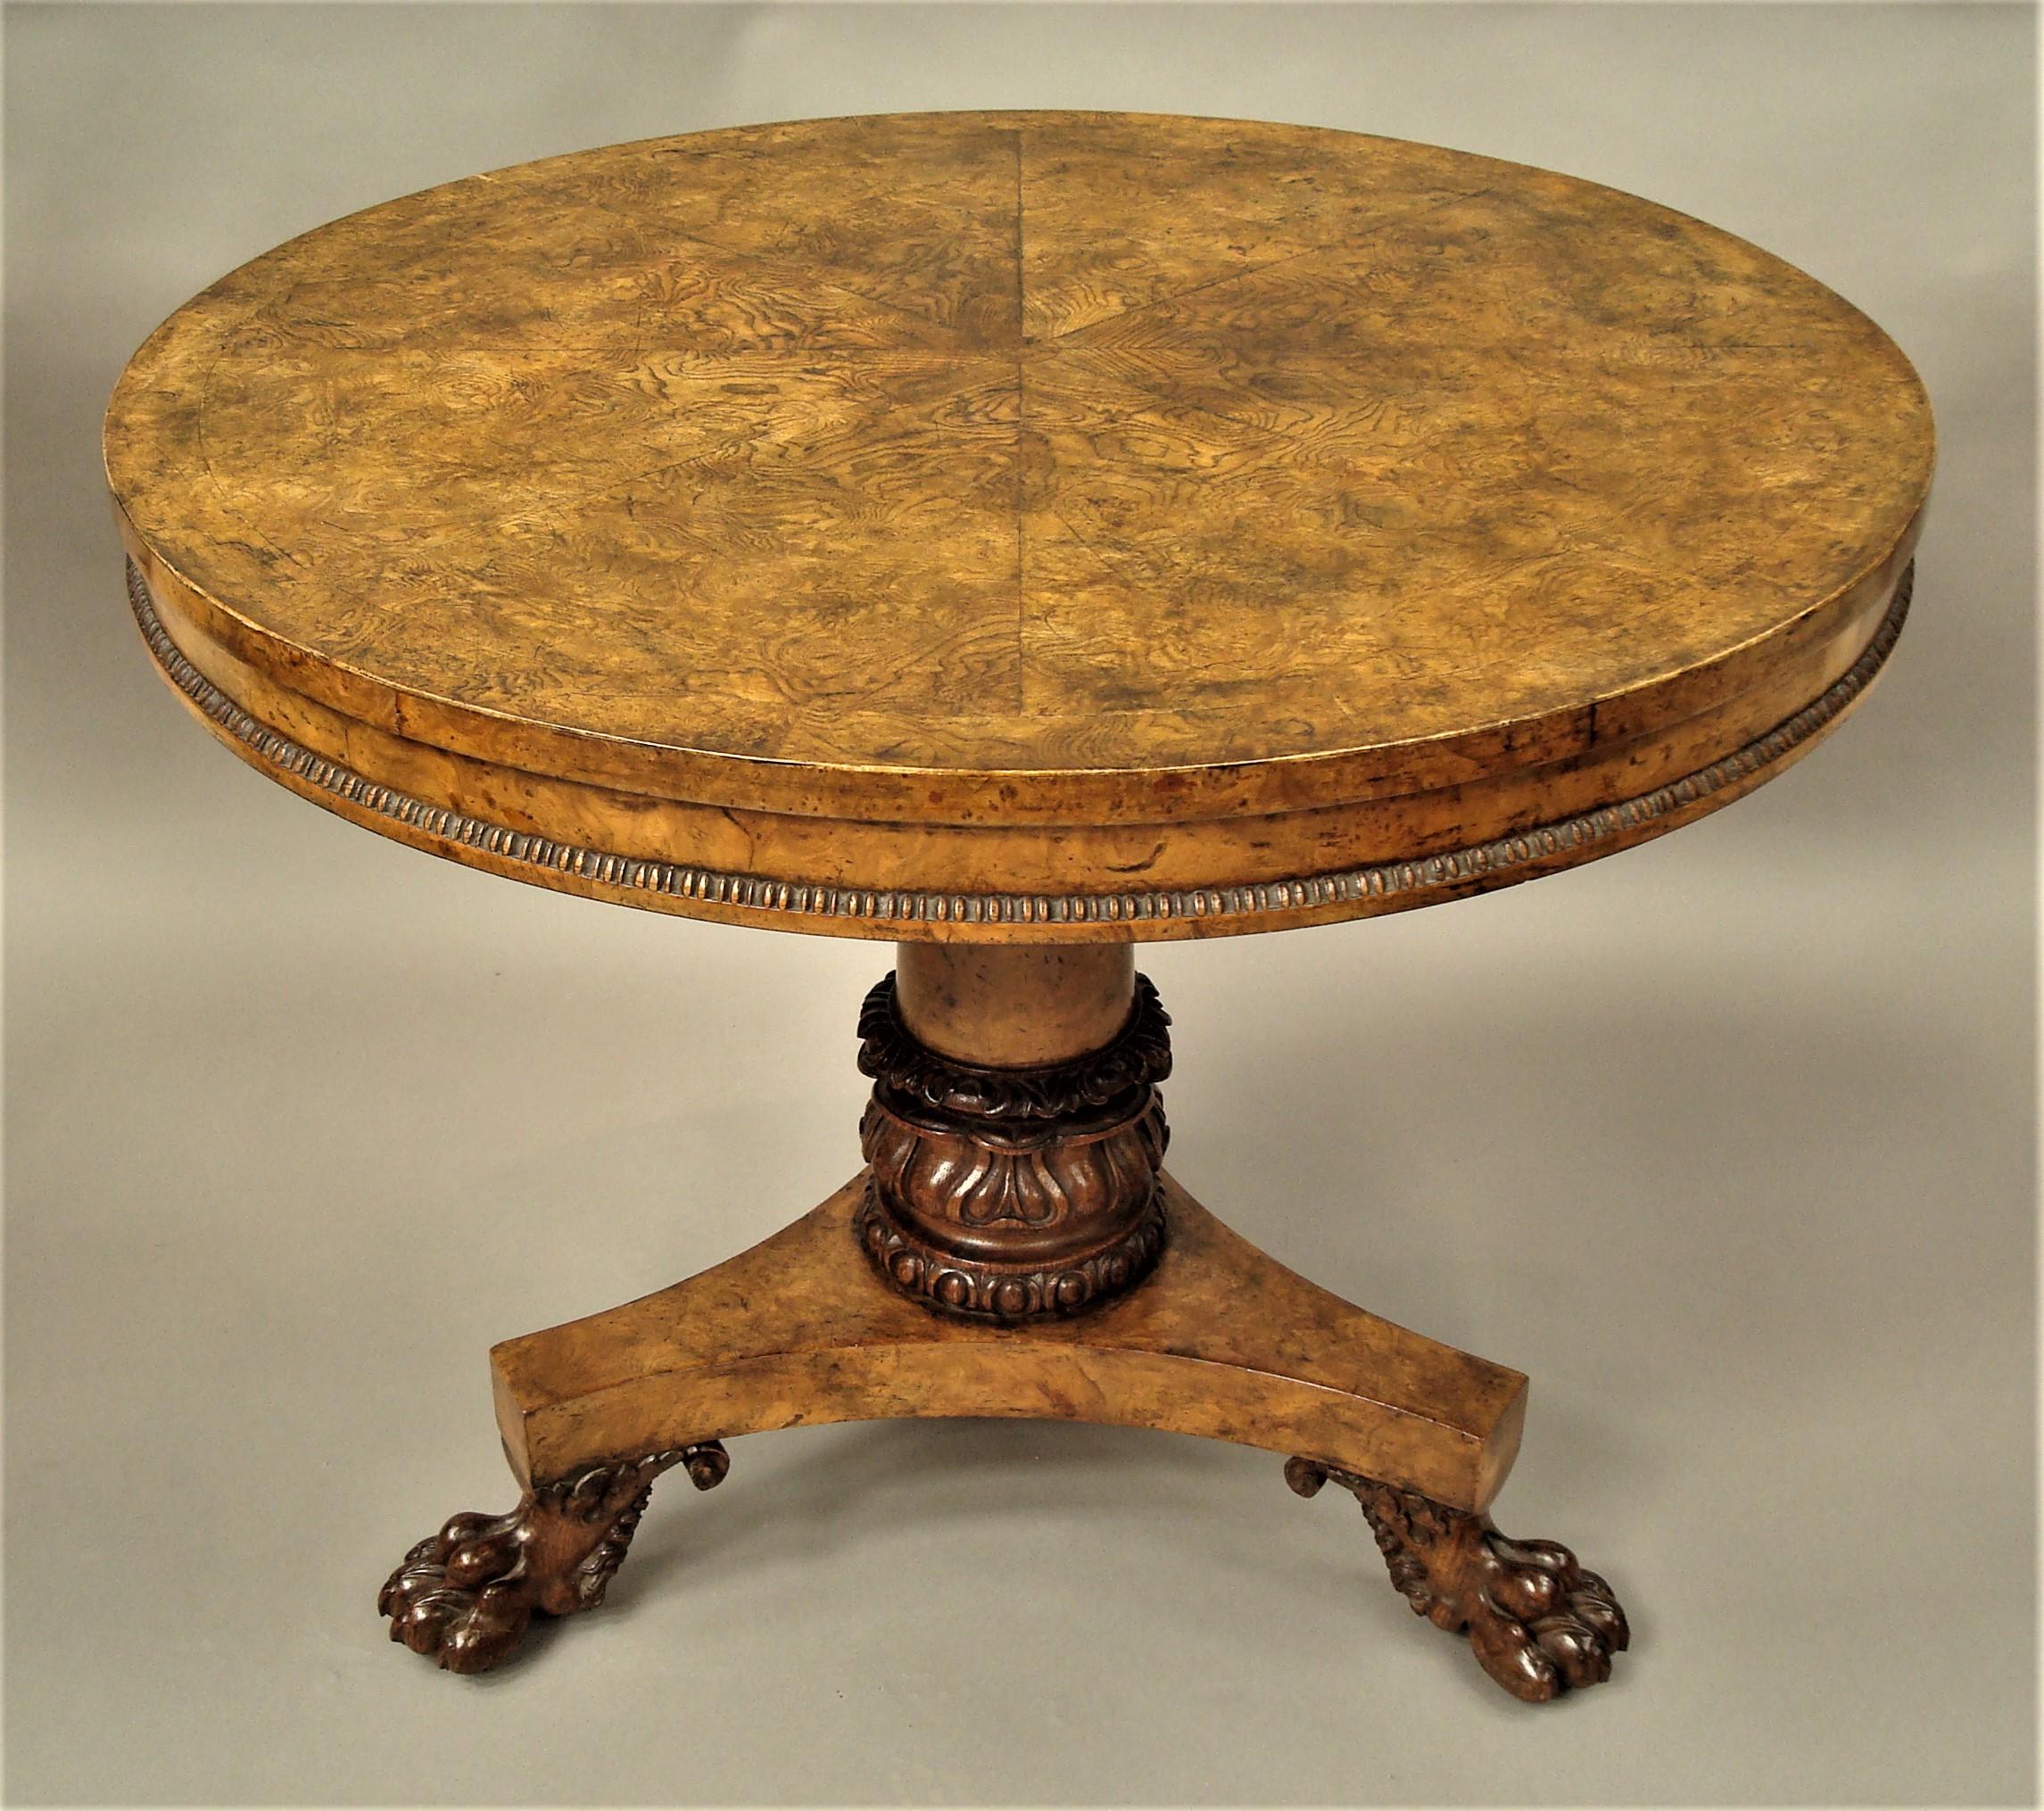 A good late Regency burr ash, elm and oak centre table; the circular tilting top with striking well figured burr ash veneers in a segmented radiating design with a wide cross banded border; above an inset frieze with a gadrooned moulded edge; raised